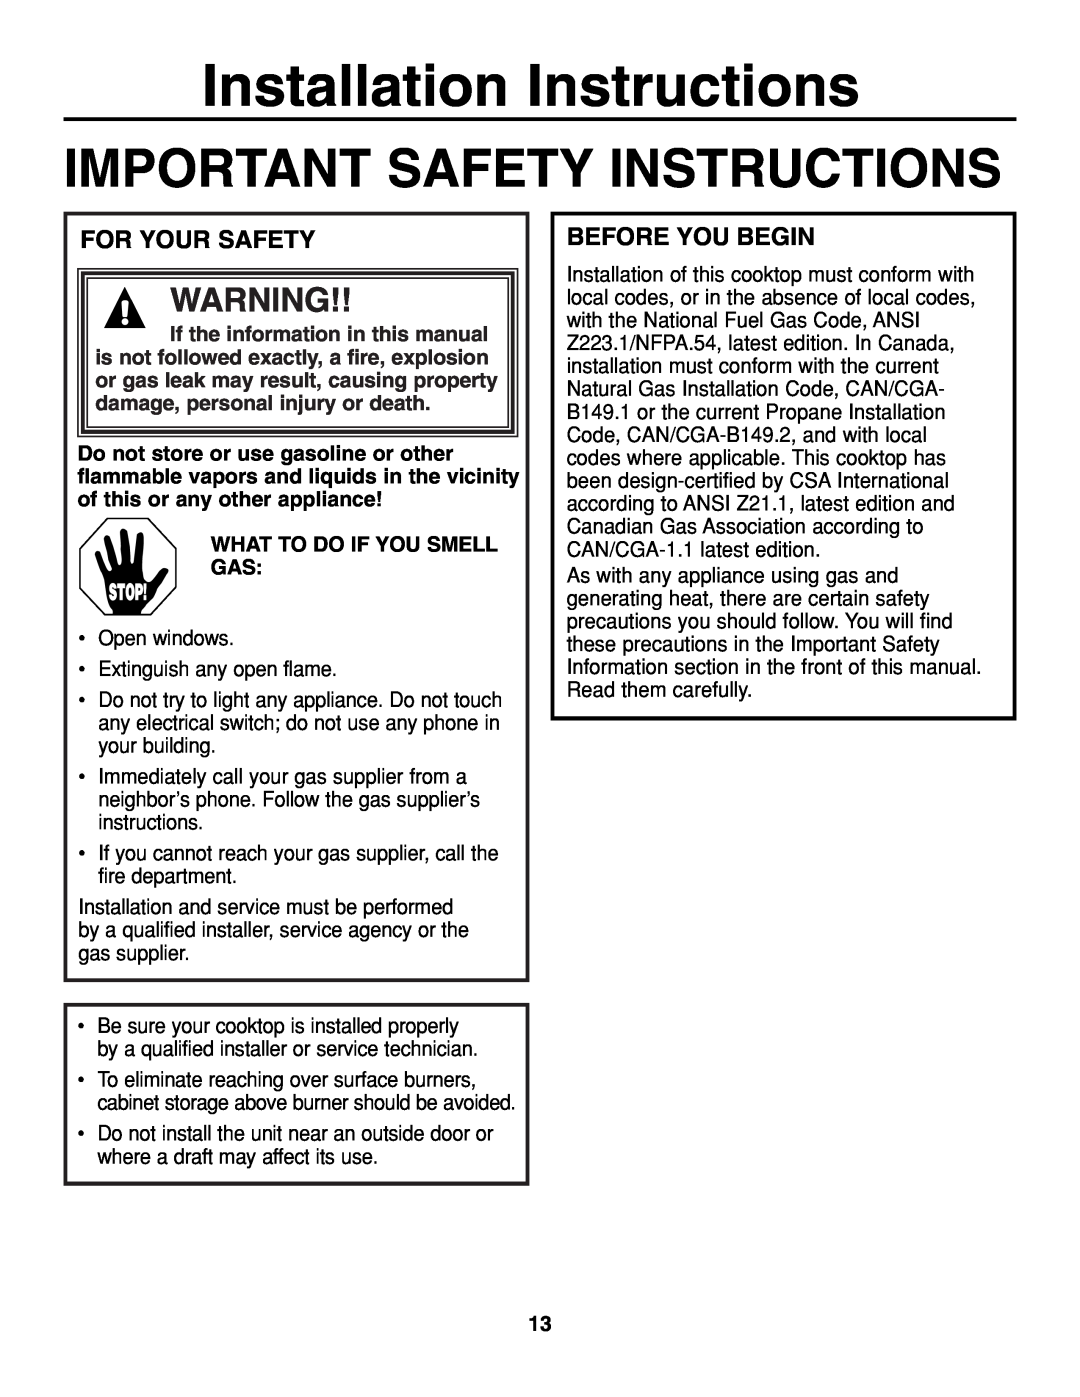 GE JGP321, JGP319 Installation Instructions, Important Safety Instructions, For Your Safety, Before You Begin, Stop 